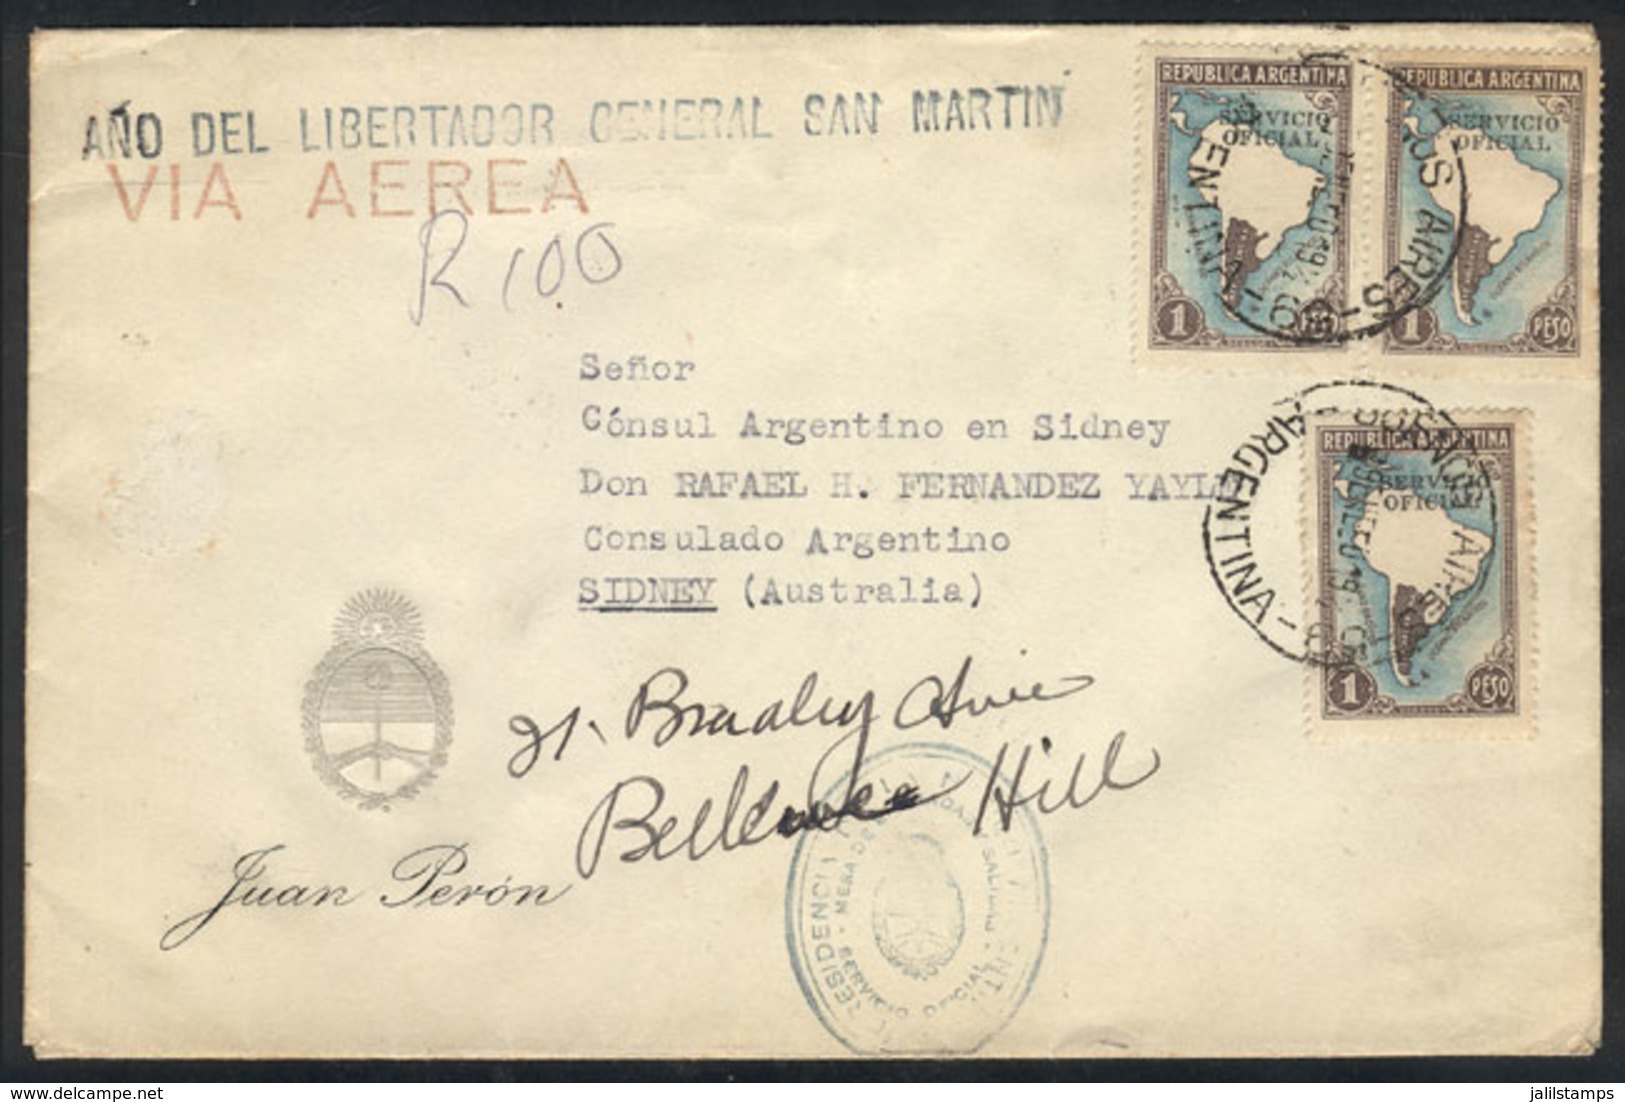 304 ARGENTINA: Cover With Cachet Of President JUAN PERÓN, Sent To Australia On 9/JA/1950 With Official Postage Of 3P., W - Officials